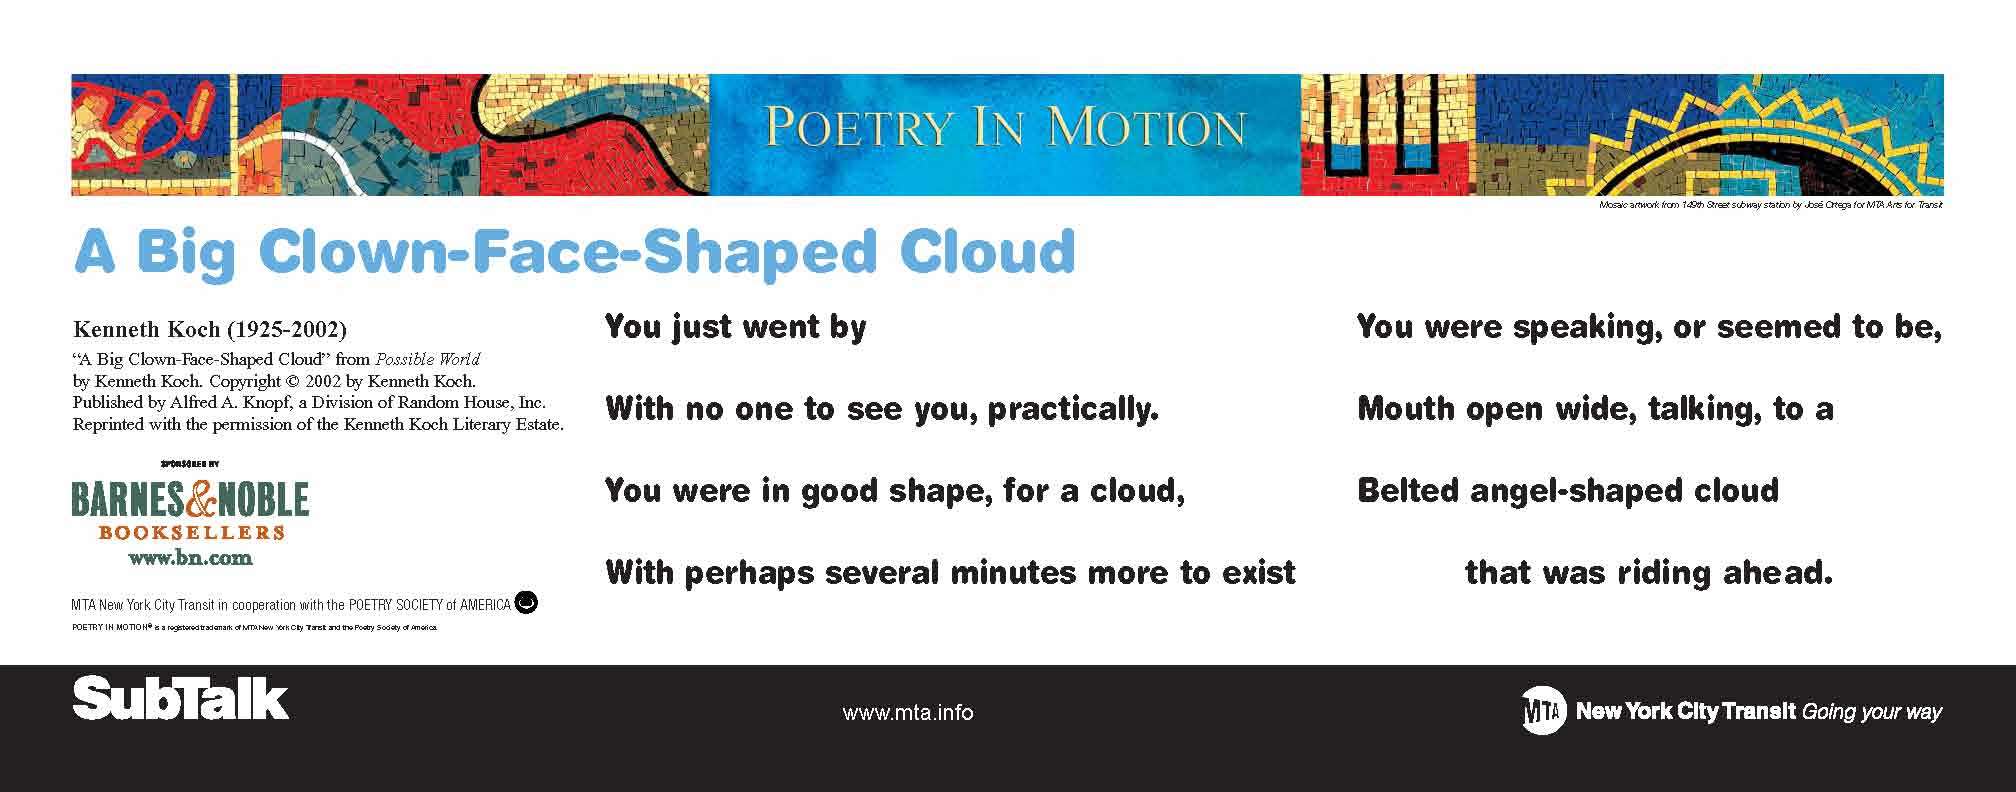 A white horizontal poster with a colorful mosaic at the top features a poem titled A Big Clown-Face-Shaped Cloud, by Kenneth Koch.